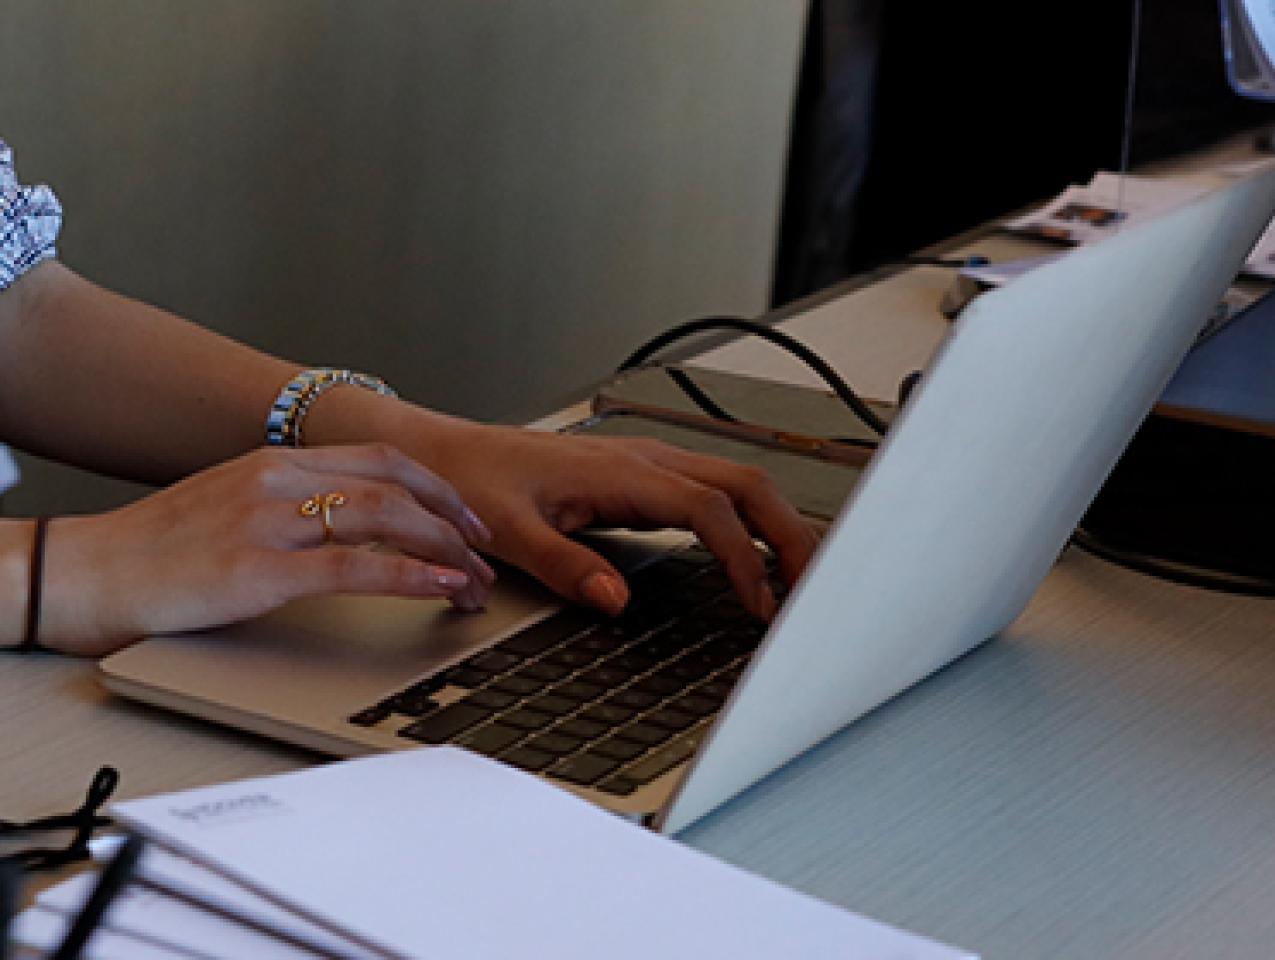 color photograph of a woman's hands typing on a laptop computer